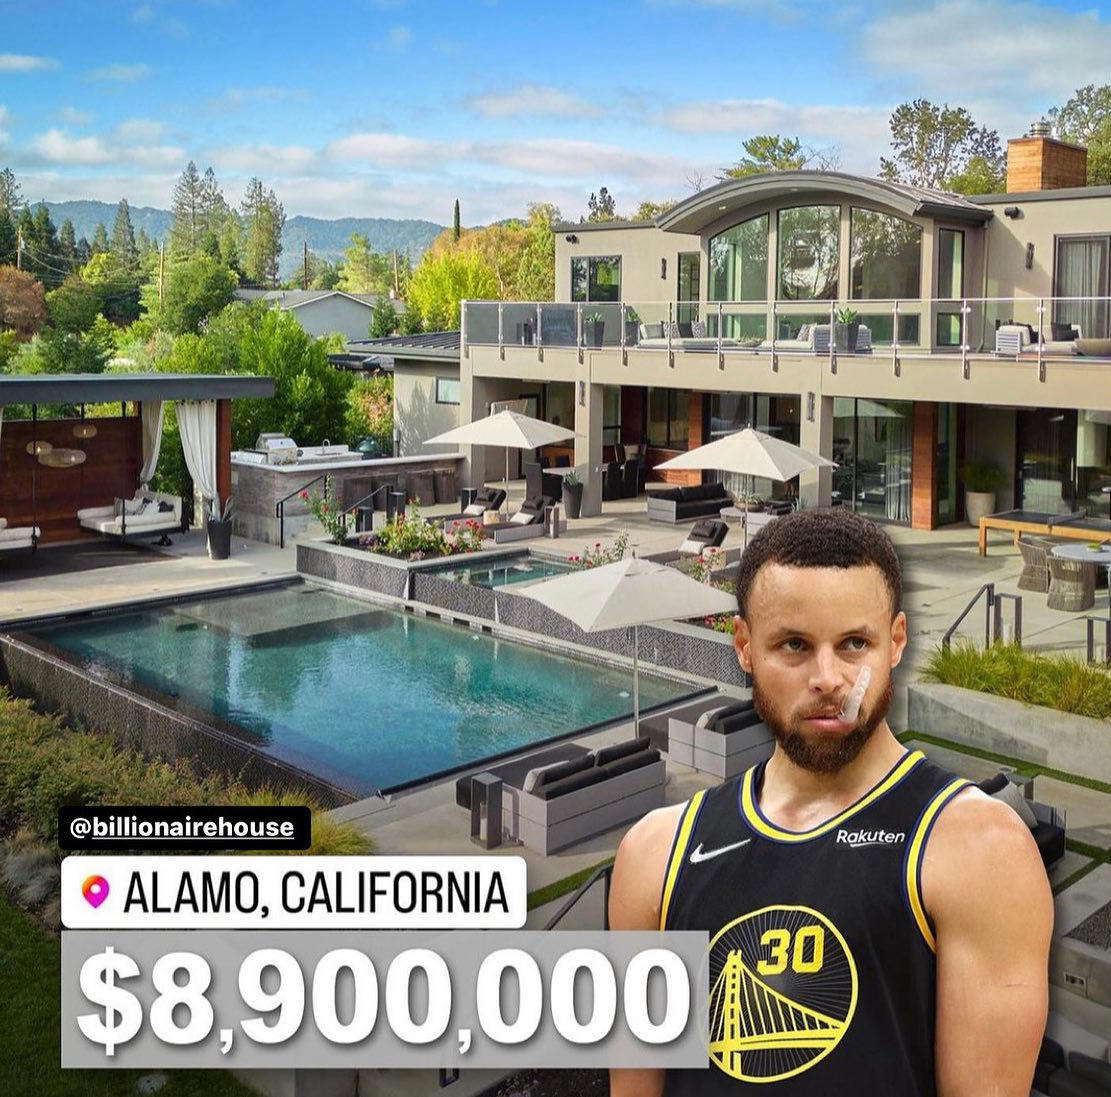 Luxury Real Estate - #stephencurry30’s former Bay Area mansion is currently on the market for $8